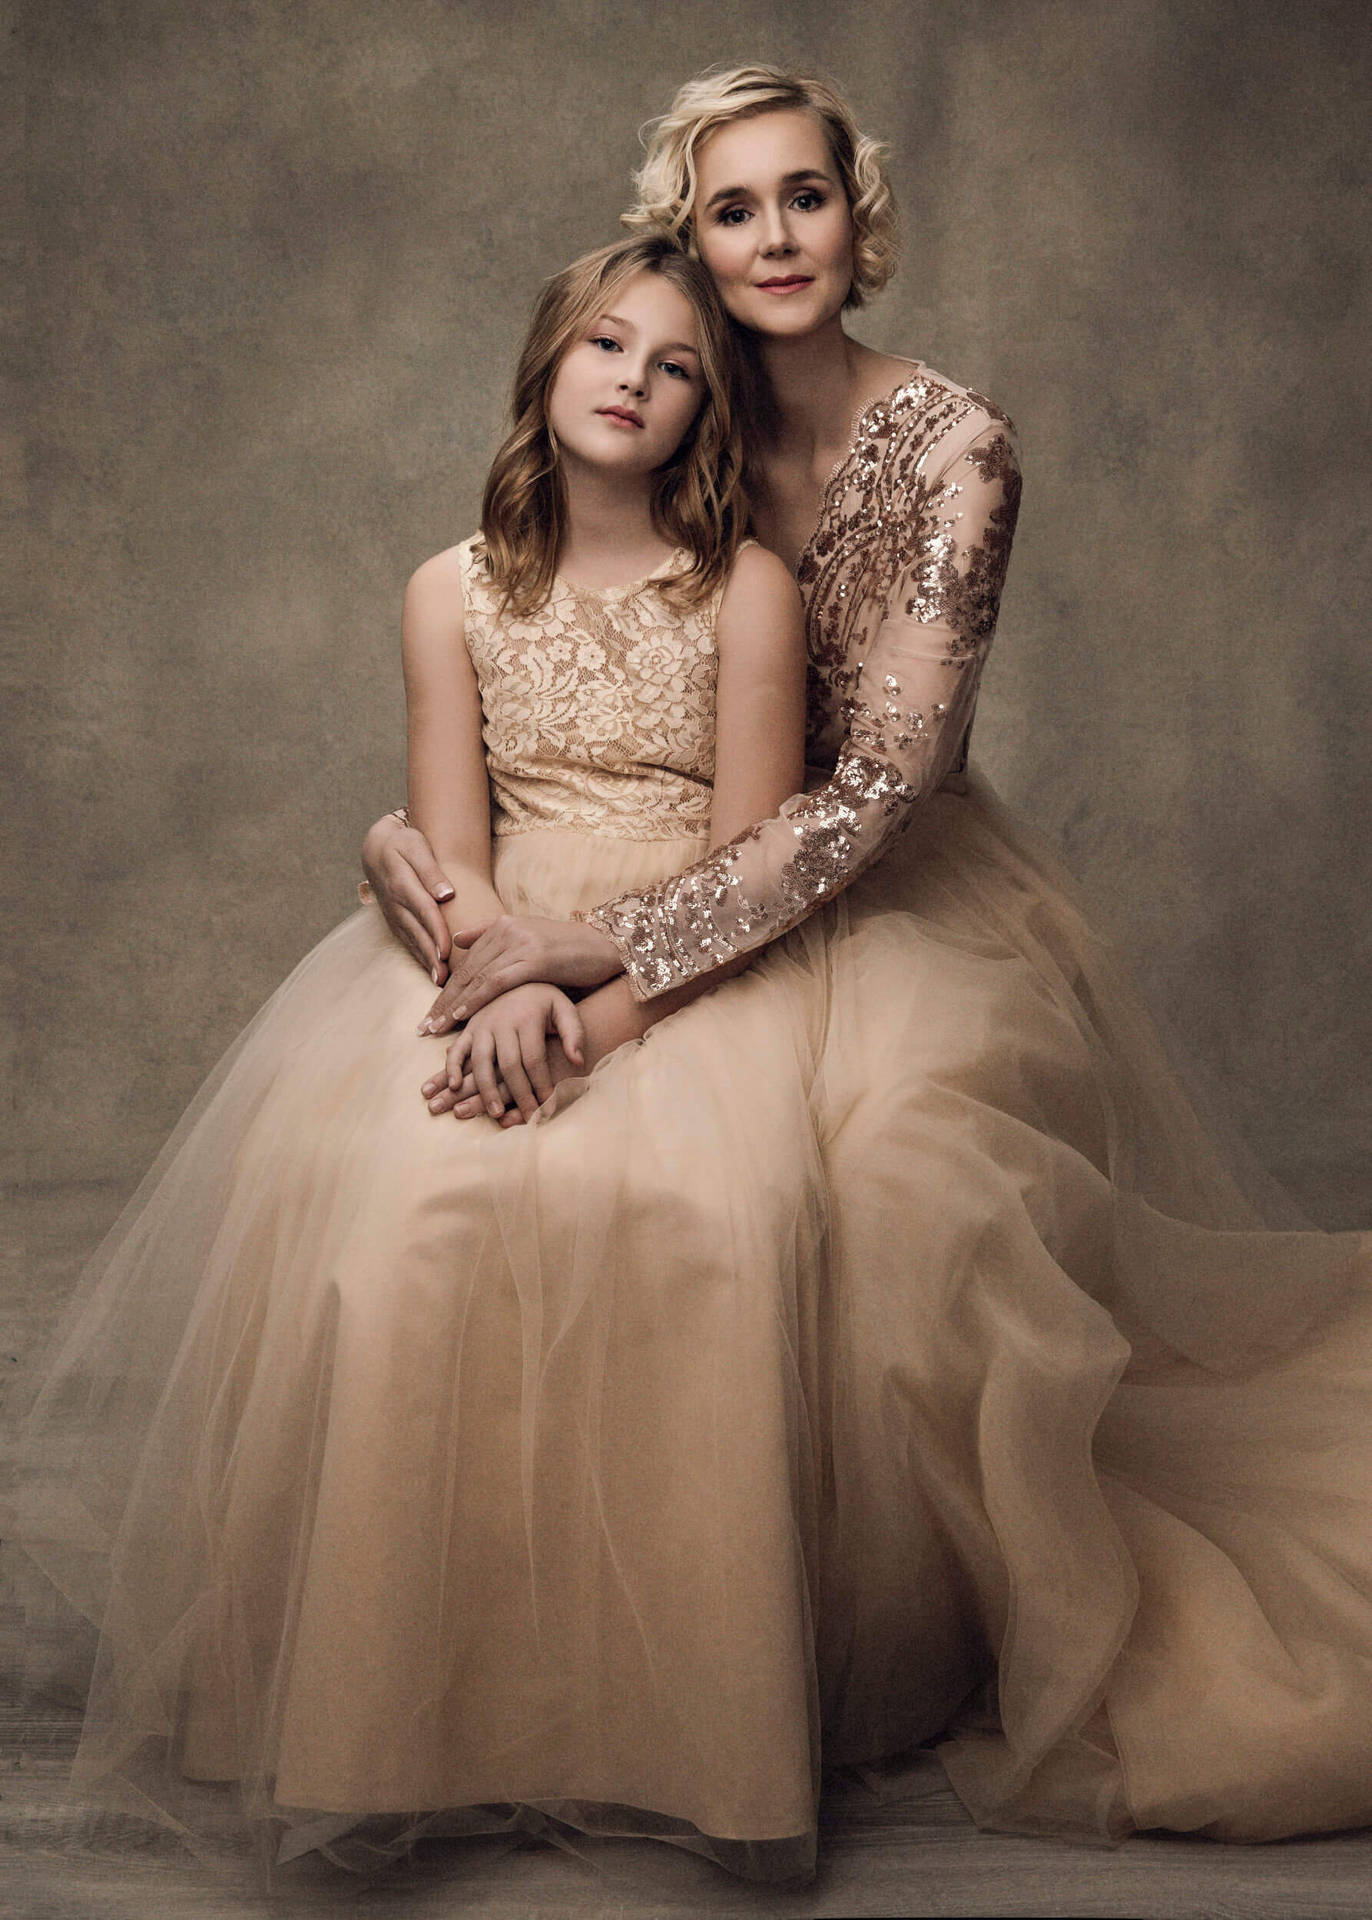 Loving Mother and Daughter in Matching Elegant Gowns Wallpaper